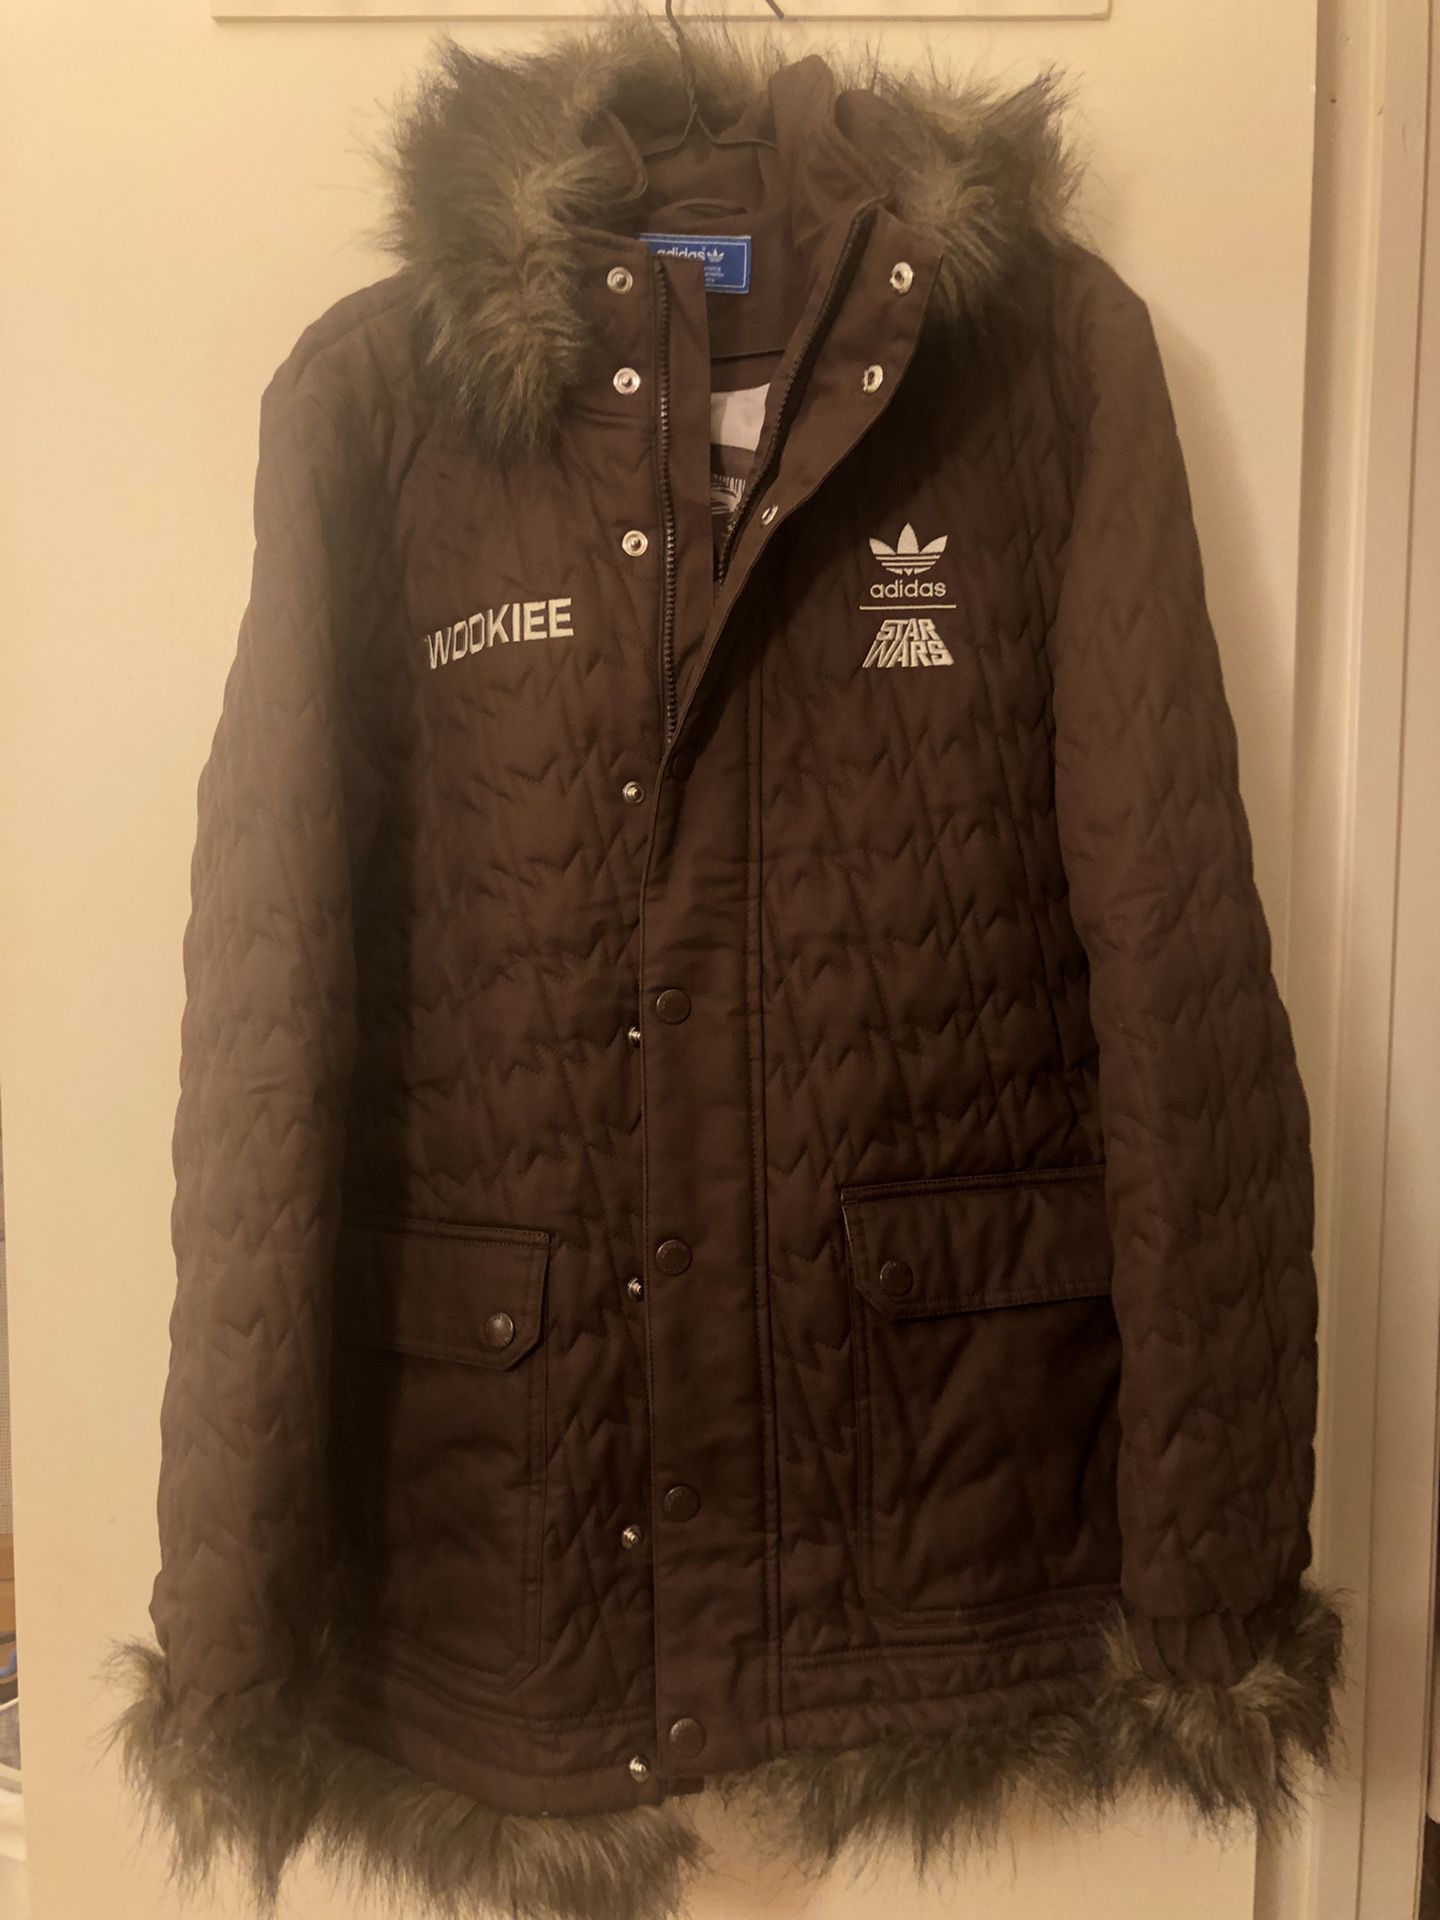 NEW CONDITION (Star wars limited edition) Adidas Wookie Jacket